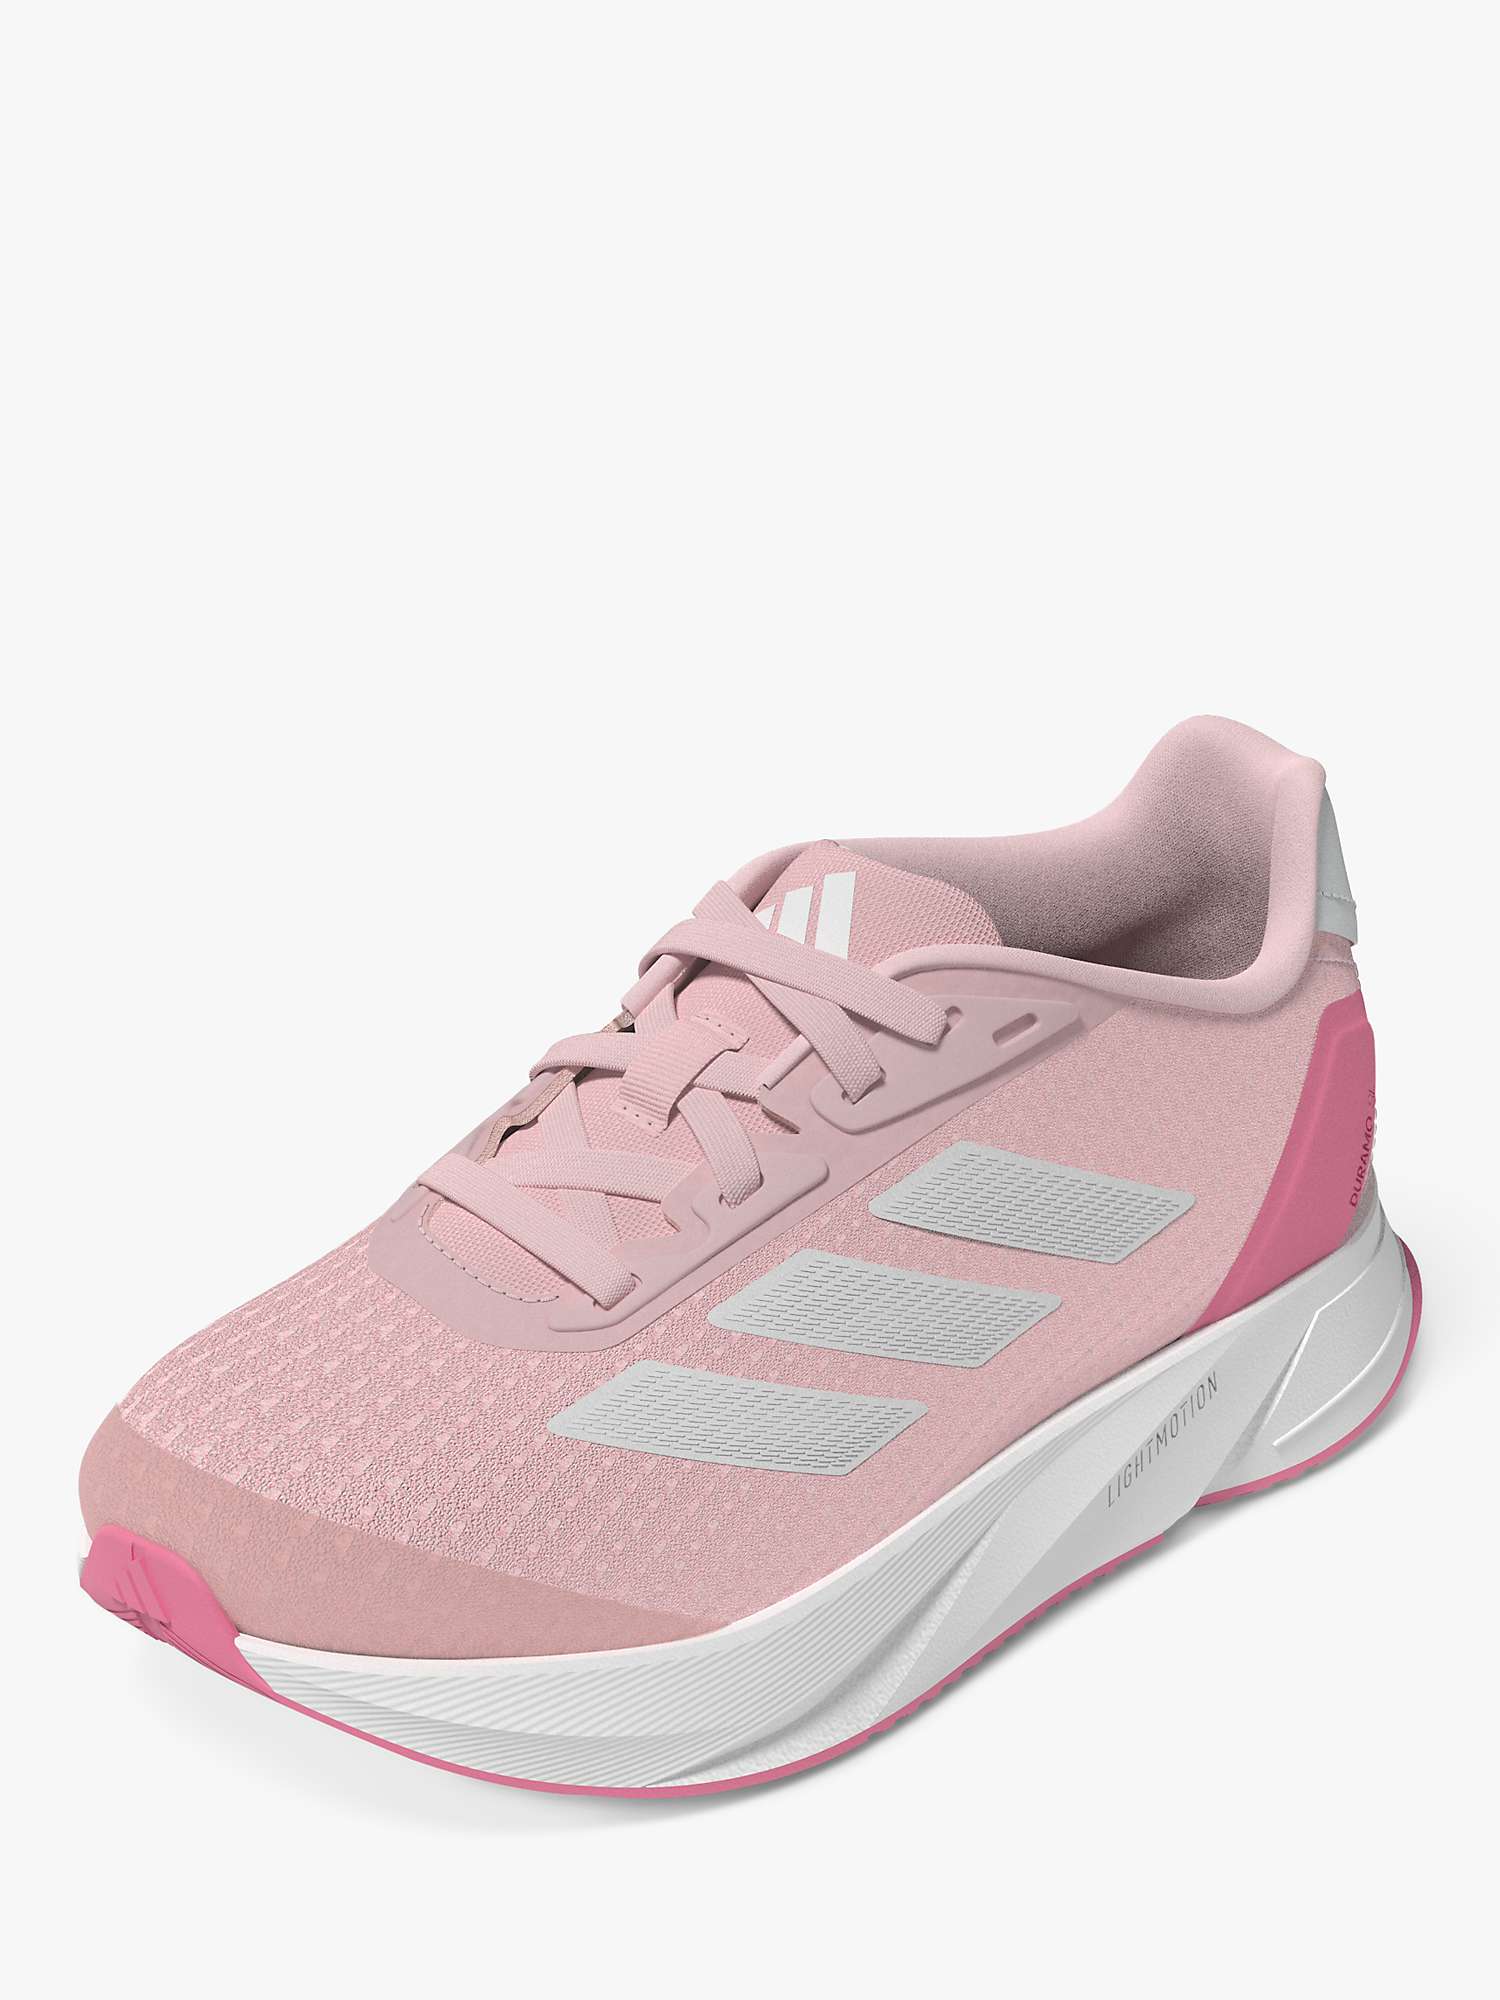 adidas Kids' Duramo SL Trainers, Clean Pink/Cloud White/Pink Fusion at ...